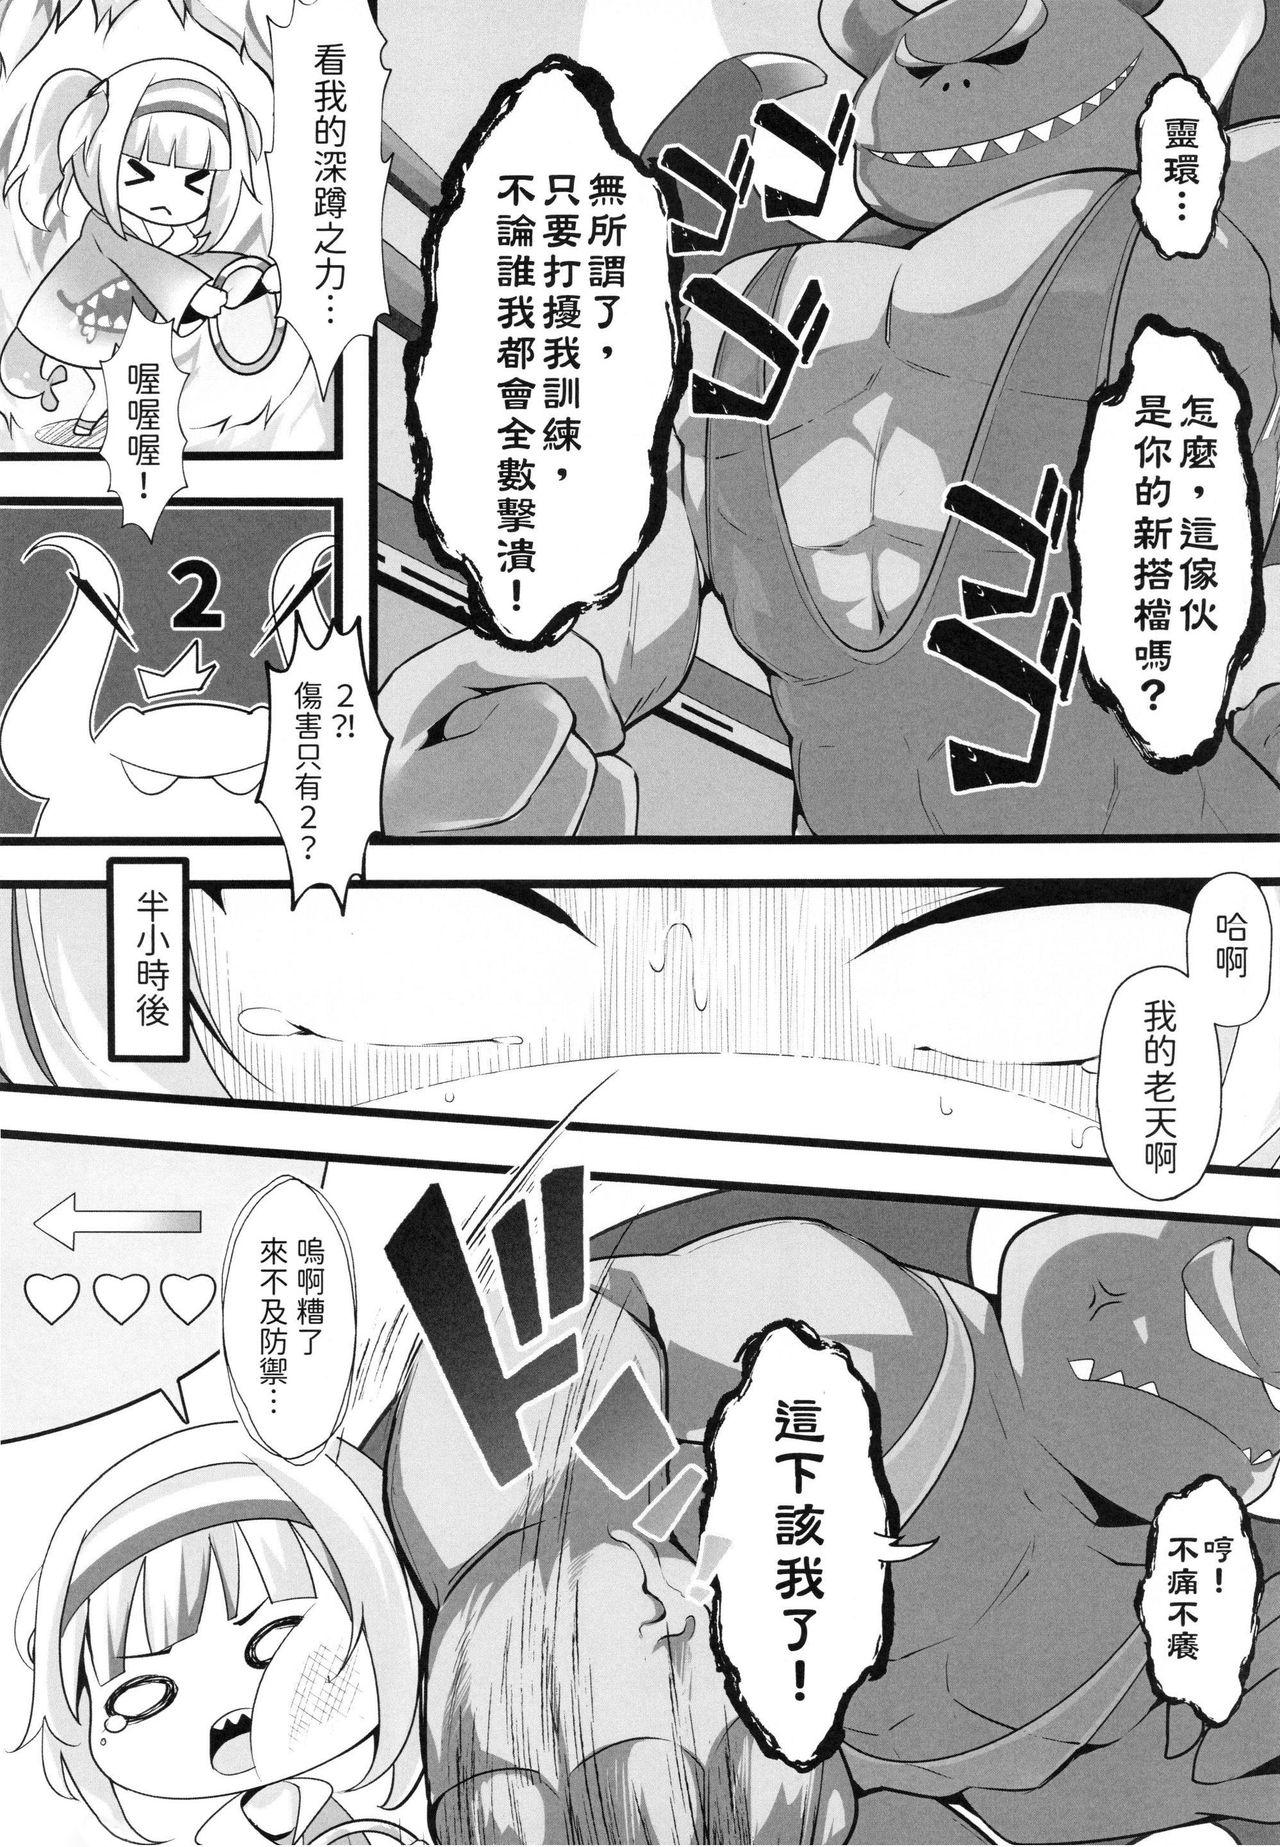 Maid 【台灣FF37】[ちやみ] Let's Sweat (hololive) (Gawr Gura) (Vtuber) [Chinese] [Decensored] - Hololive Ring fit adventure Homosexual - Page 5